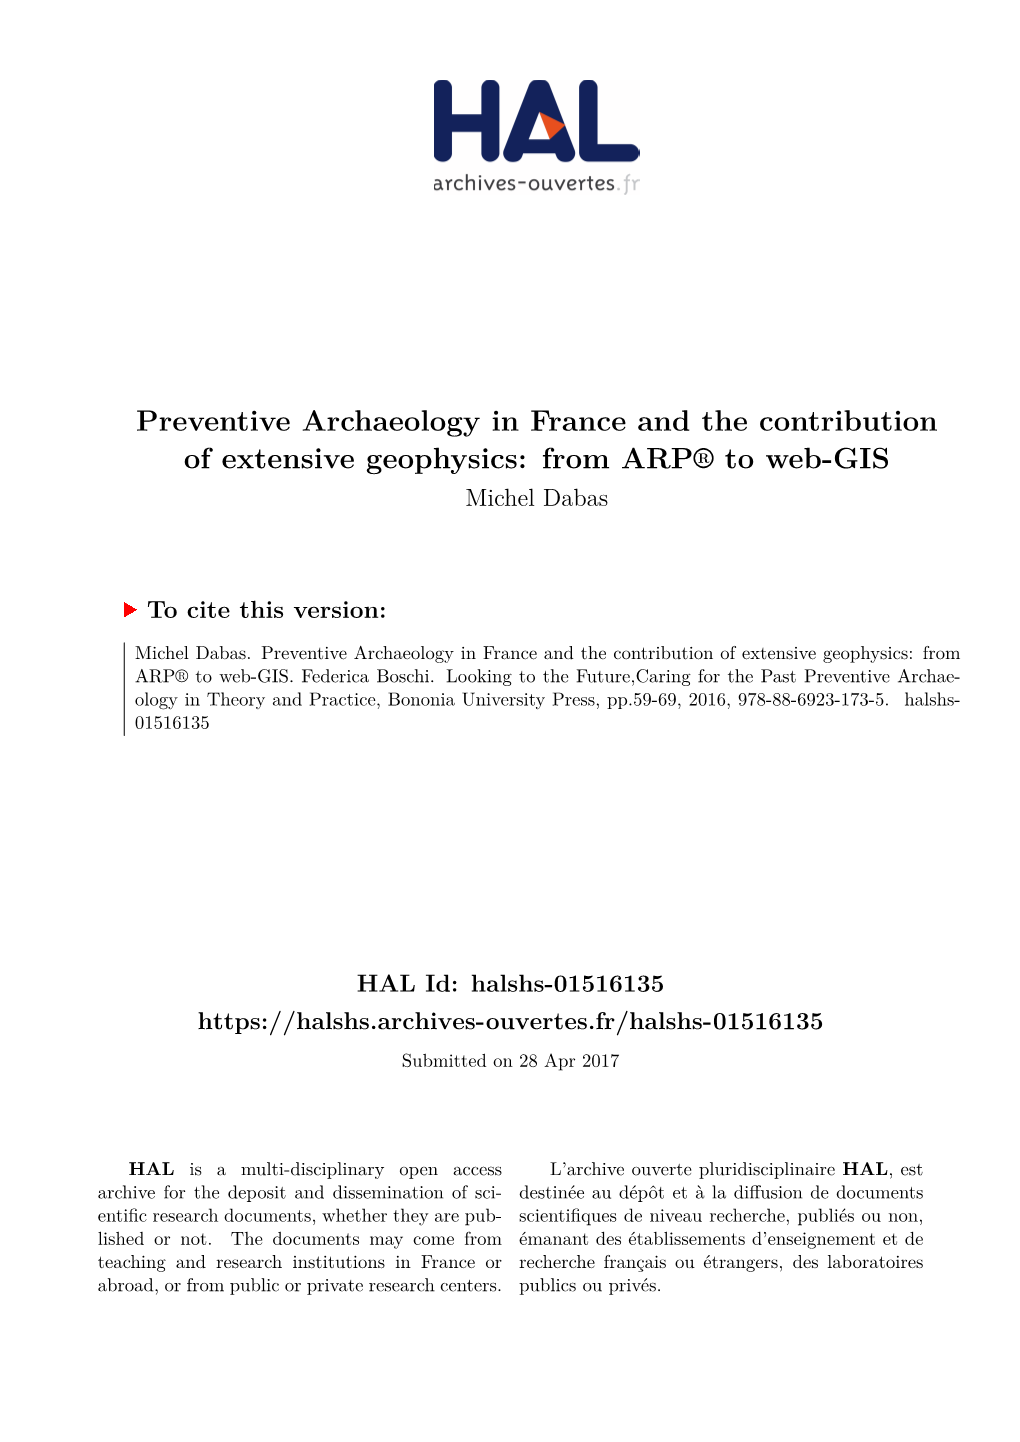 Preventive Archaeology in France and the Contribution of Extensive Geophysics: from ARP® to Web-GIS Michel Dabas